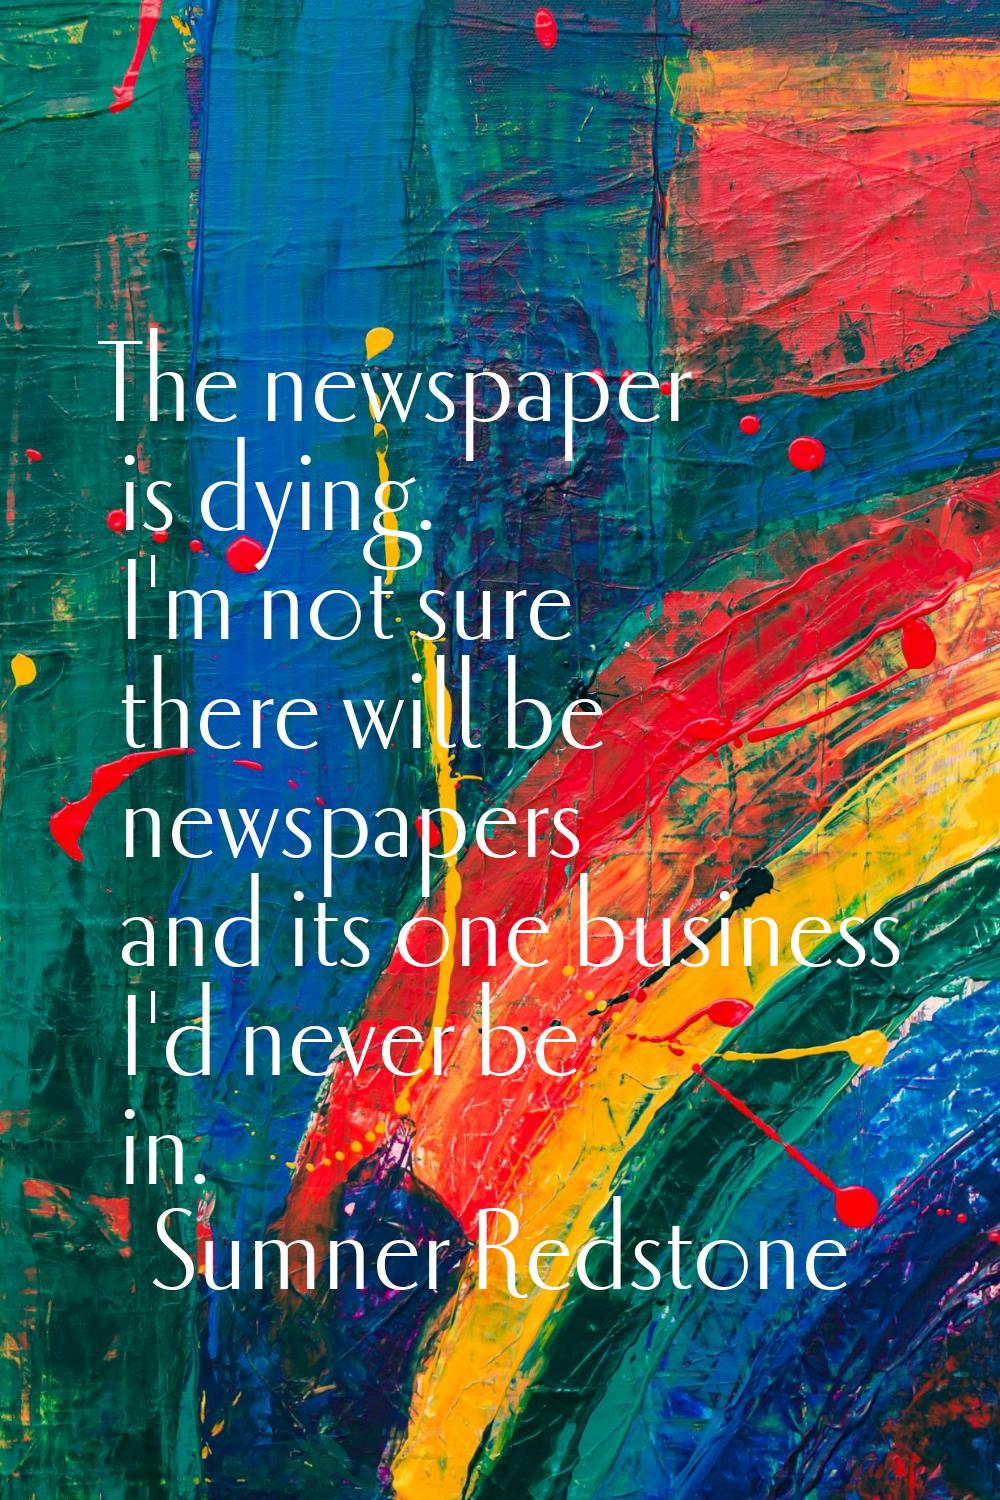 The newspaper is dying. I'm not sure there will be newspapers and its one business I'd never be in.